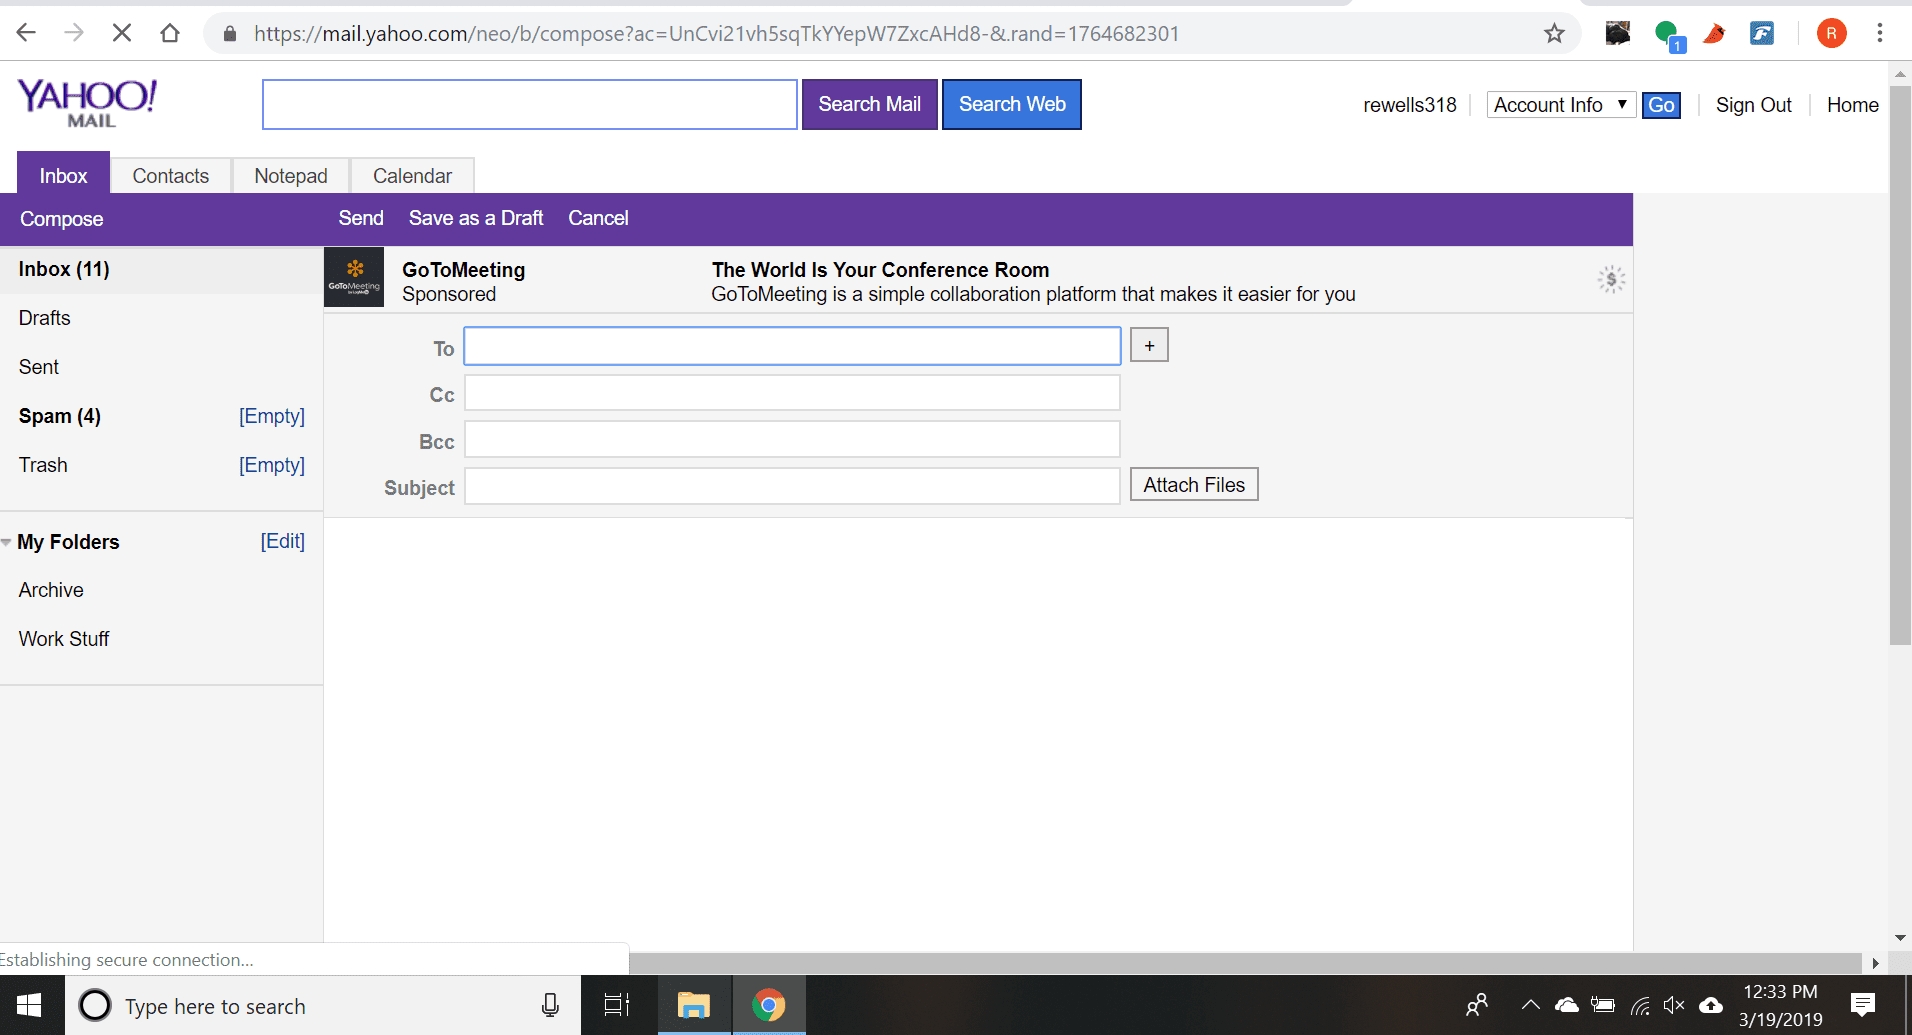 How To Send An Attachment With Yahoo Mail No Calendar Icon In Yahoo Mail